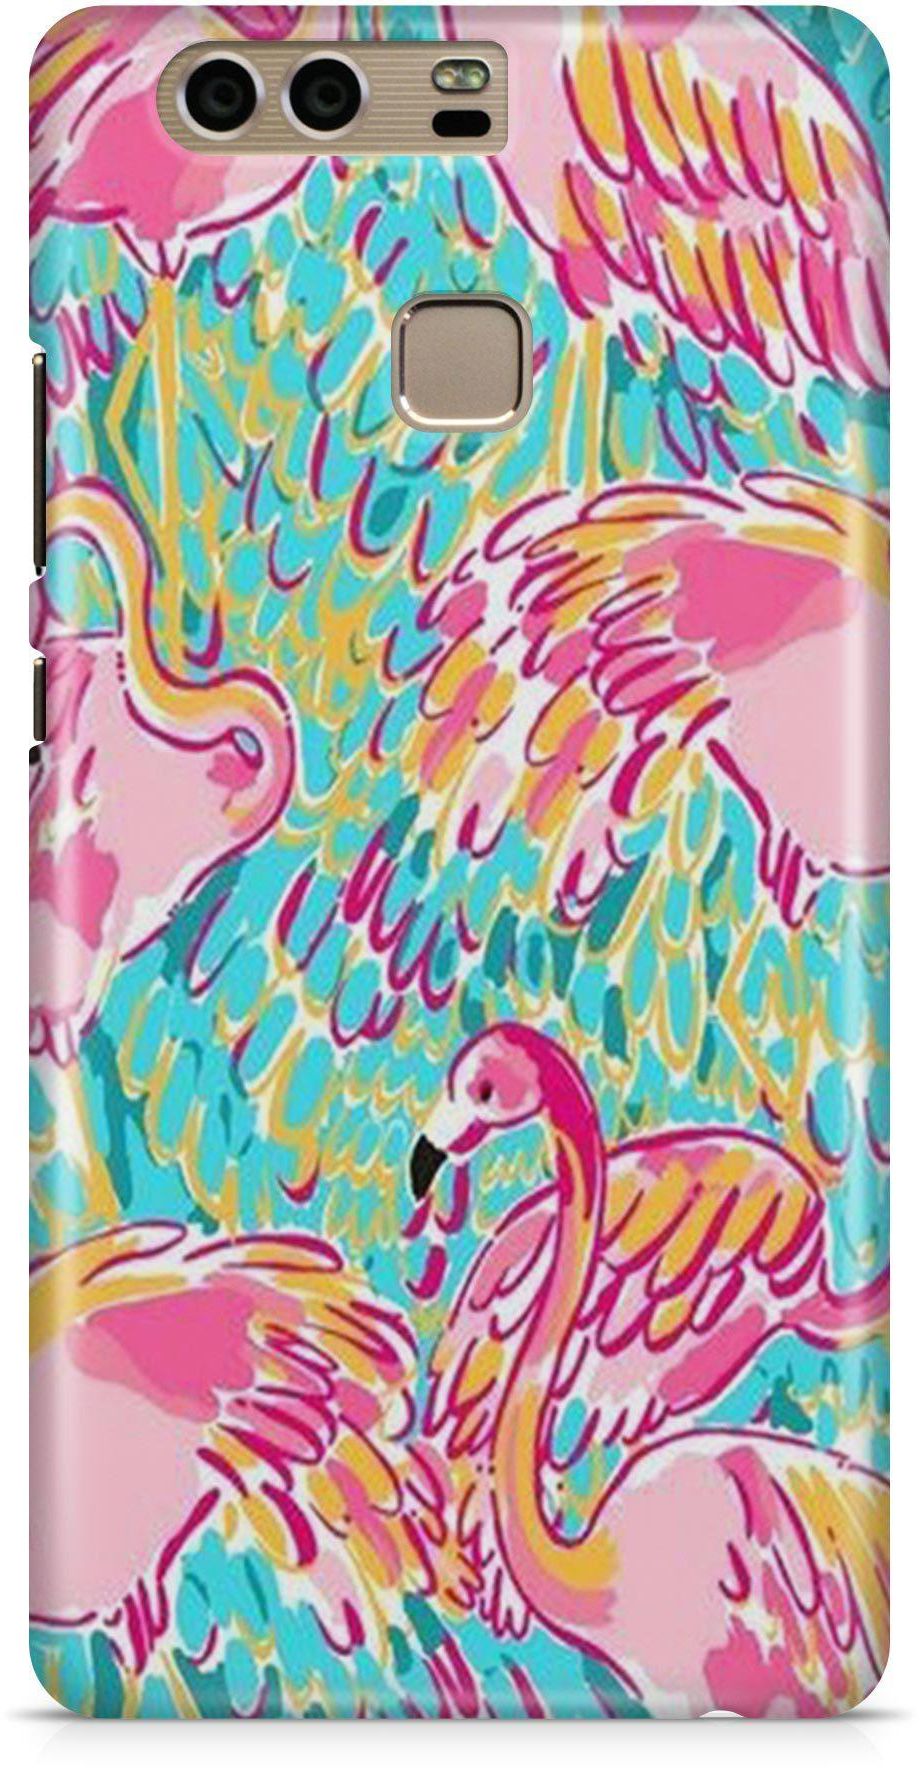 Flamingoes Flying Colourful Pink 3D Full Back & Side Phone Case Protector Cover for Huawei P9